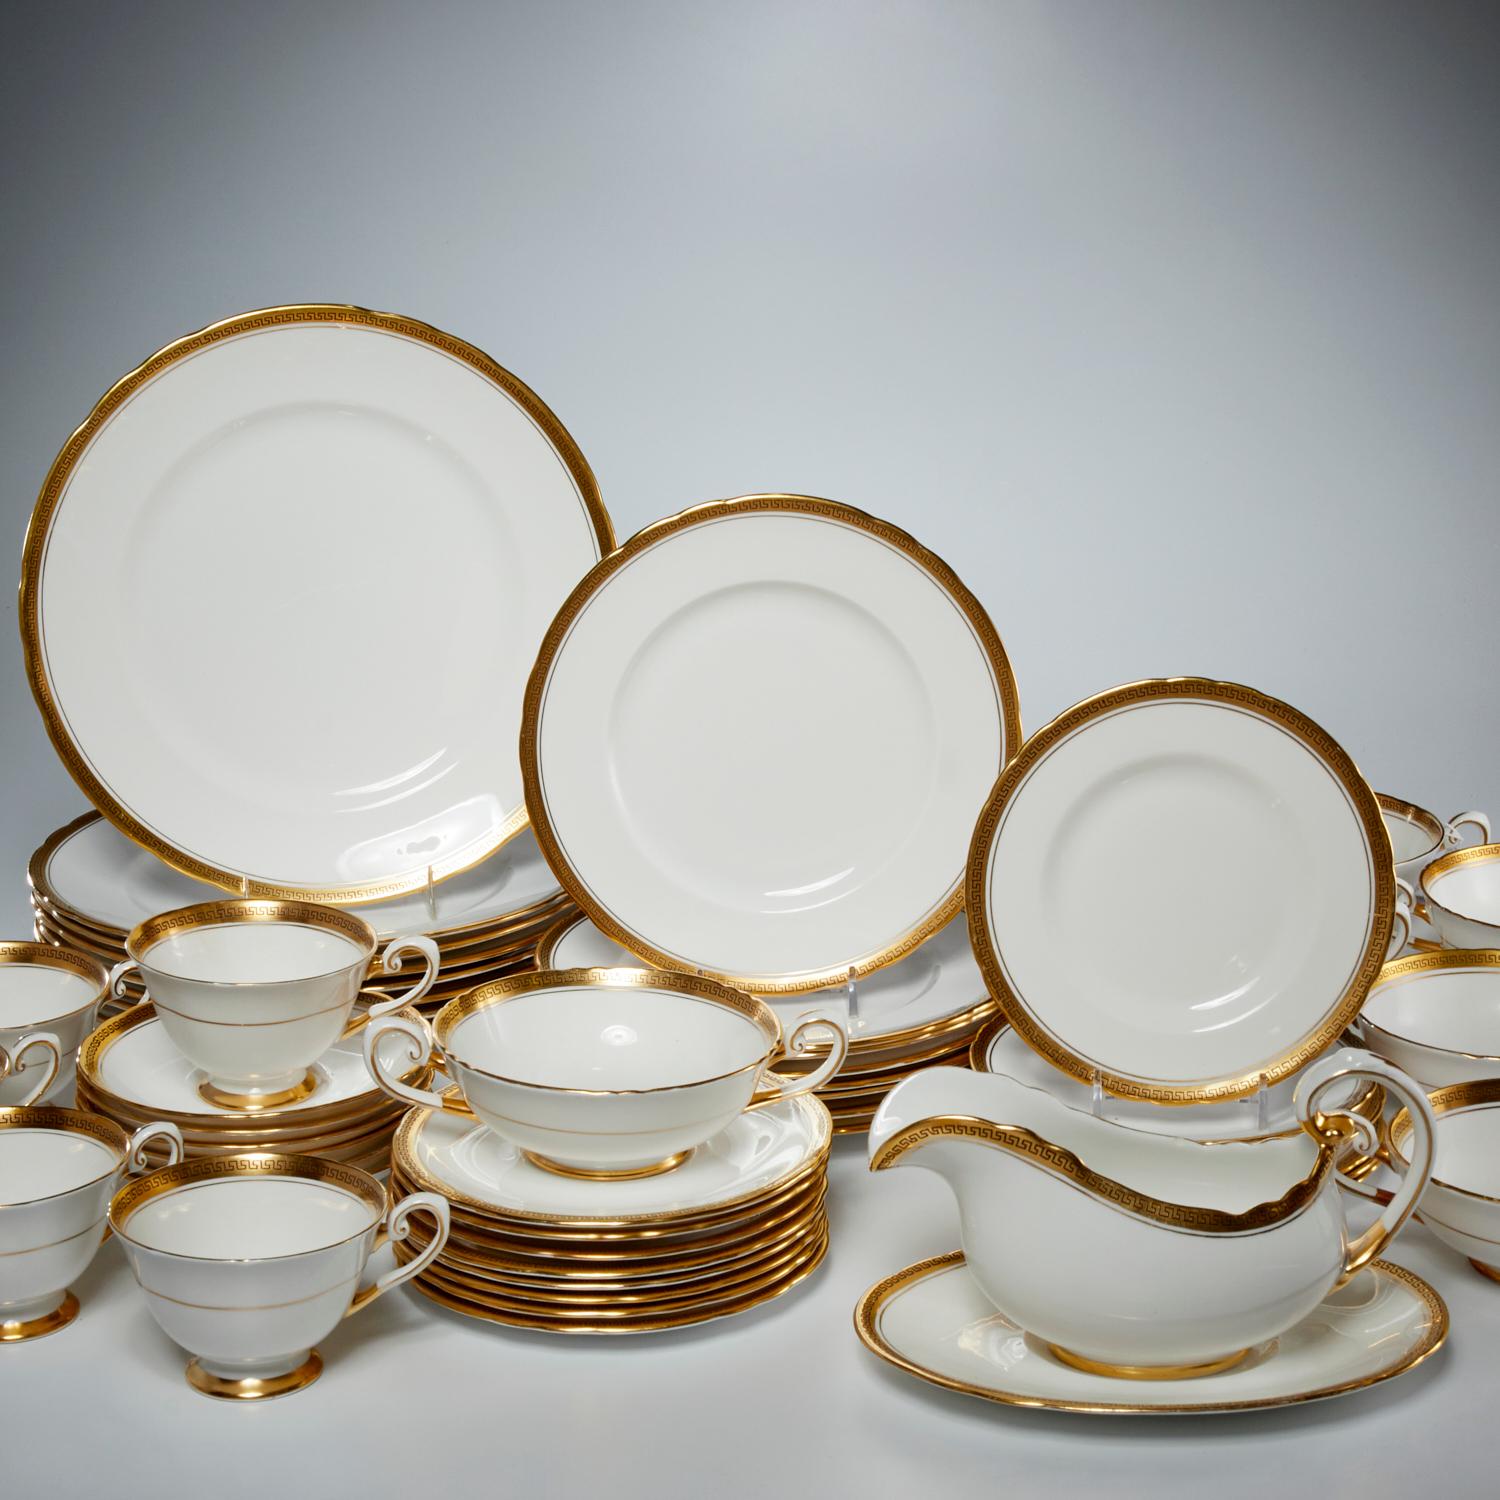 20th c., English, Royal Tuscan for Harrold's of London (52) pieces, white porcelain dinnerware, with gilt rim decorated in gold Greek Key design with hand painted black highlighting. Maker's mark to underside, with Harrod's retailer mark,. Set